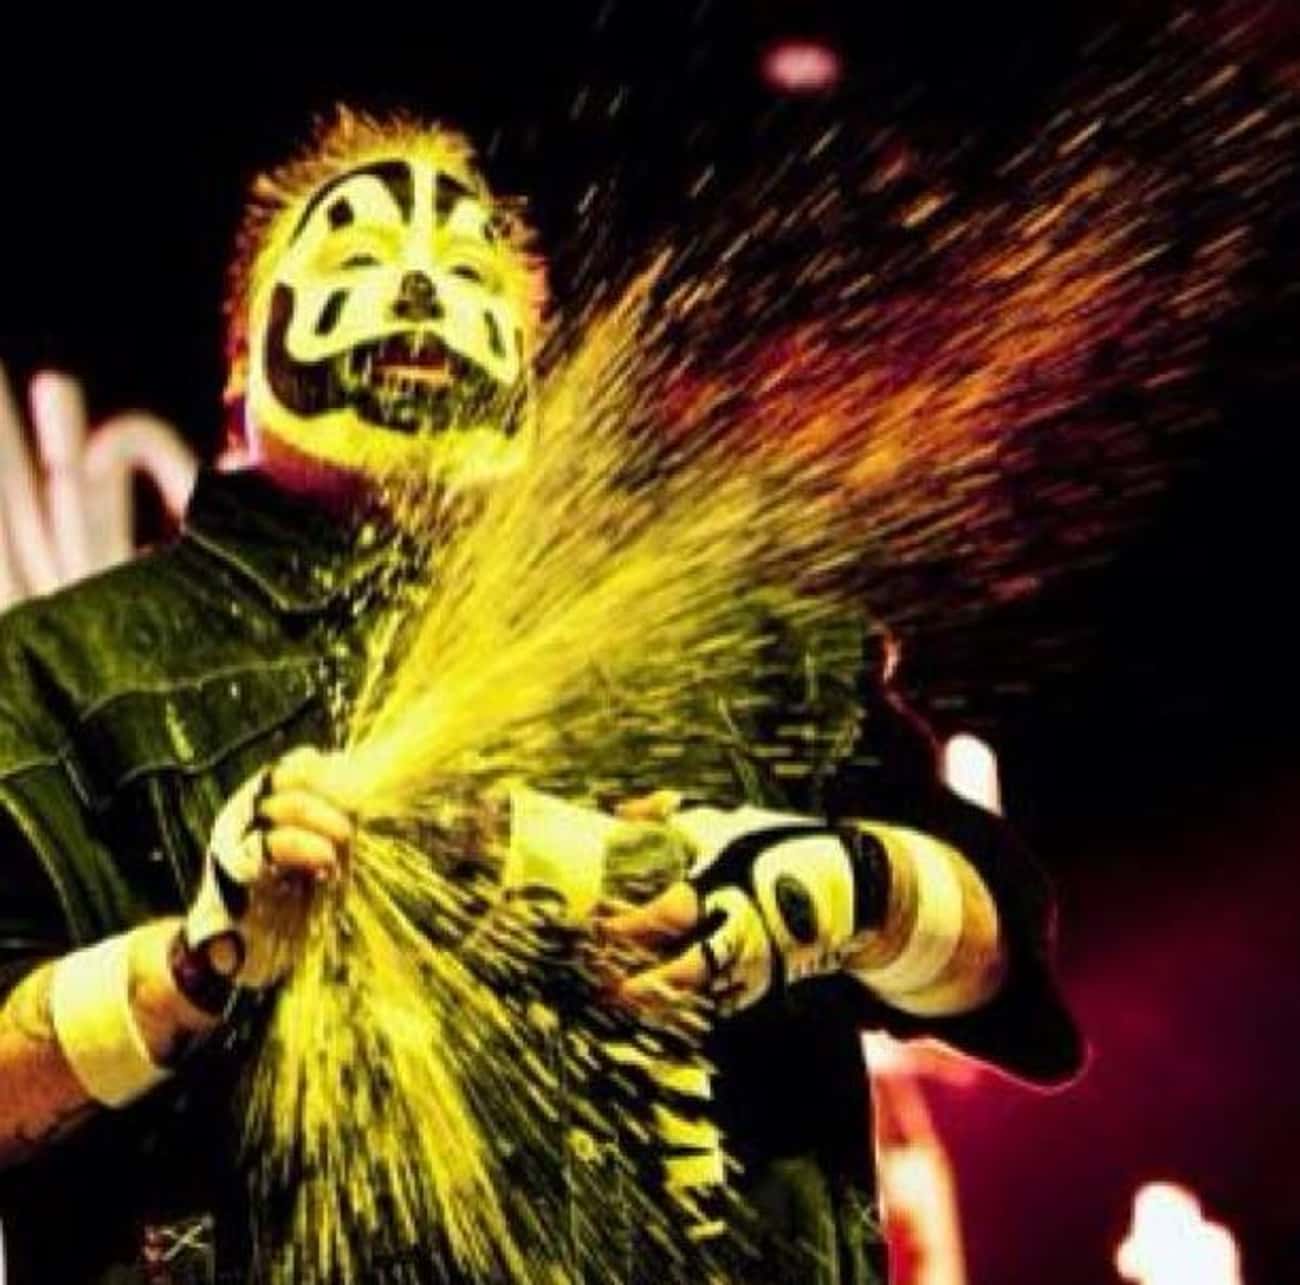 Why Are Violent J, Steve Harwell and Guy Fieri Always Throwing Things At People?